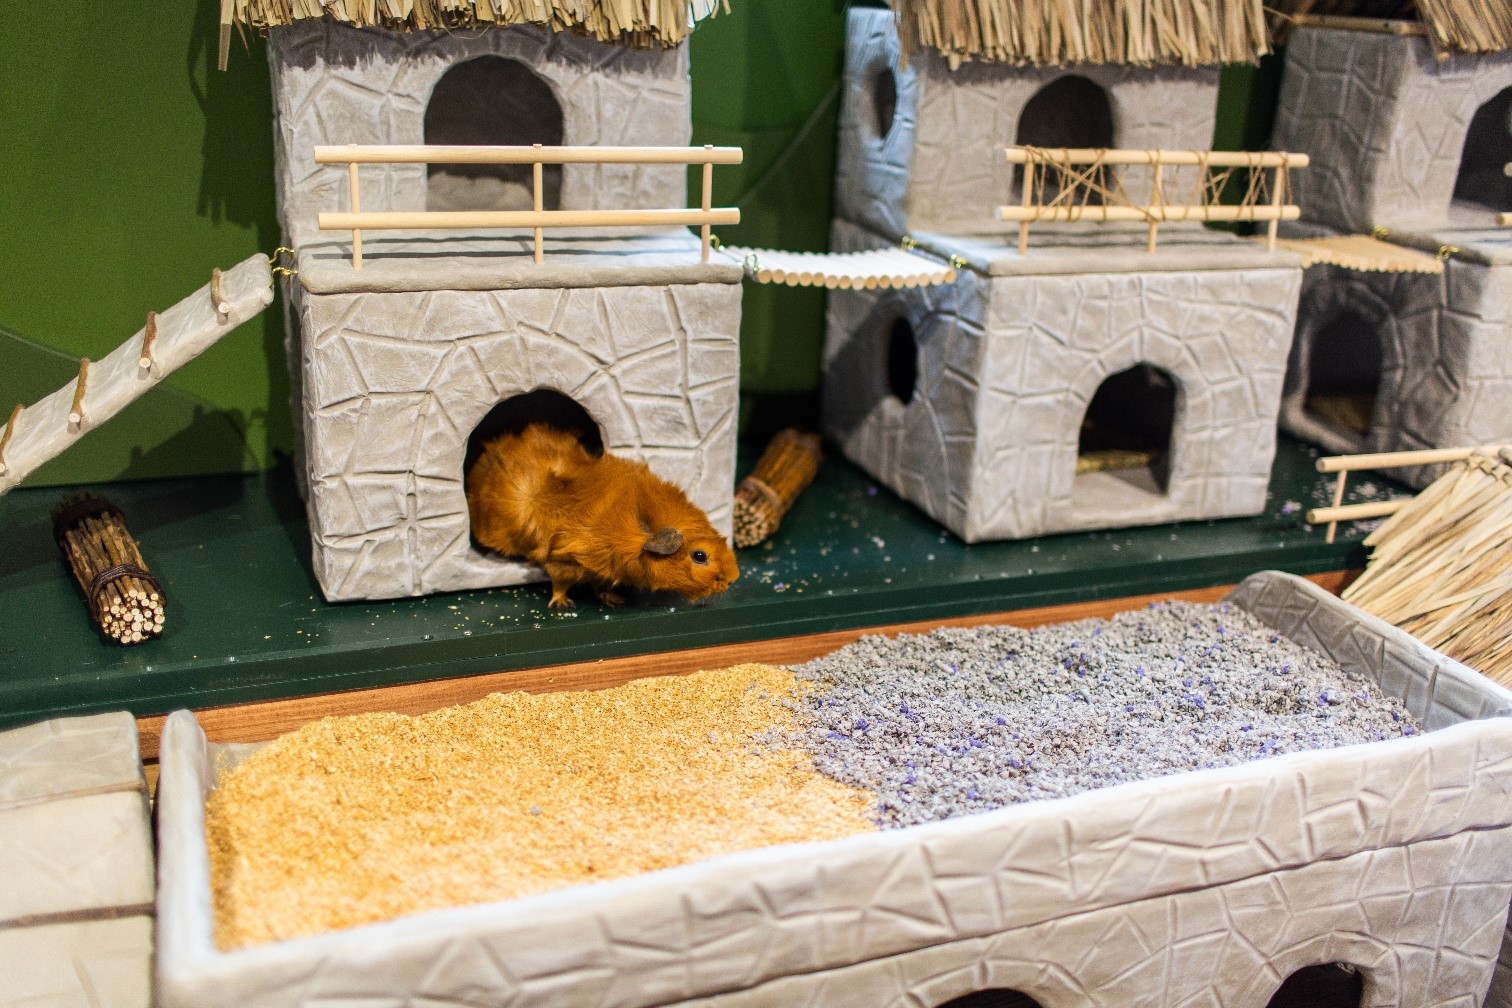 Amazonia Exhibit At The Smithsonian S National Zoo Now Includes A Guinea Pig Village Smithsonian Institution,What Do Horses Eat For Treats